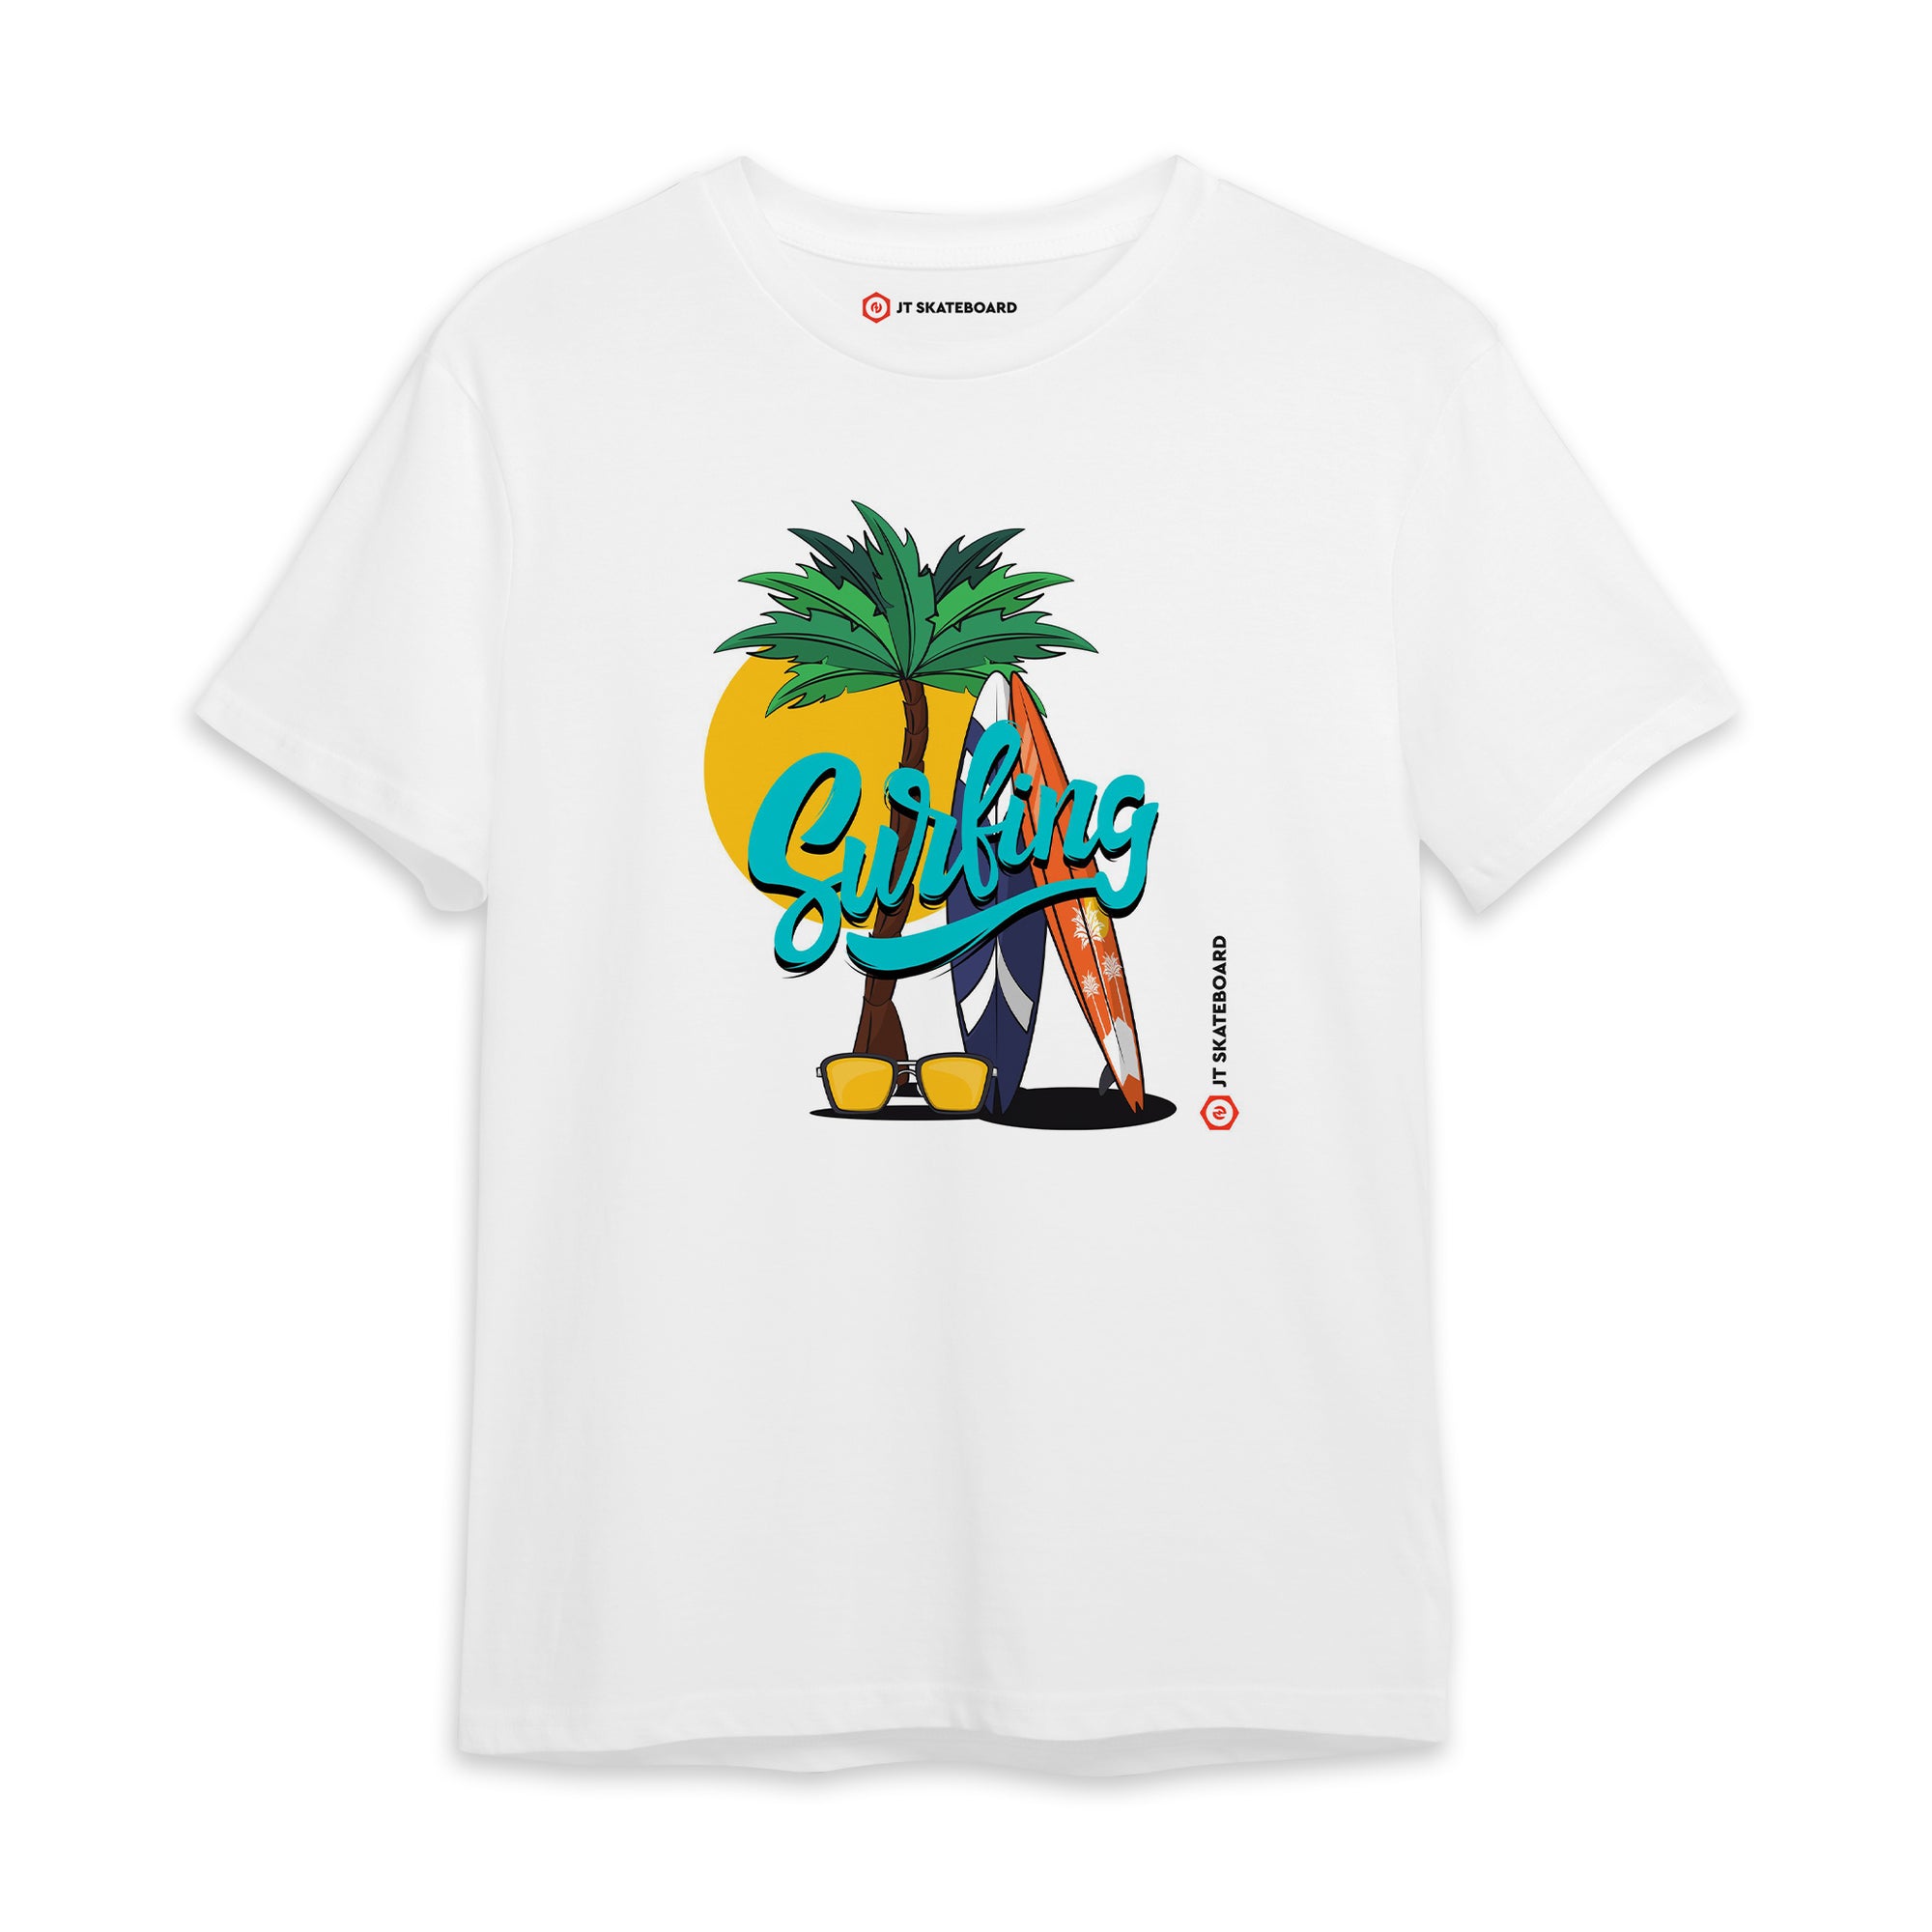 Surfing | Relaxed Loose Fitting T-Shirts - JT Skateboard - JT Skateboard